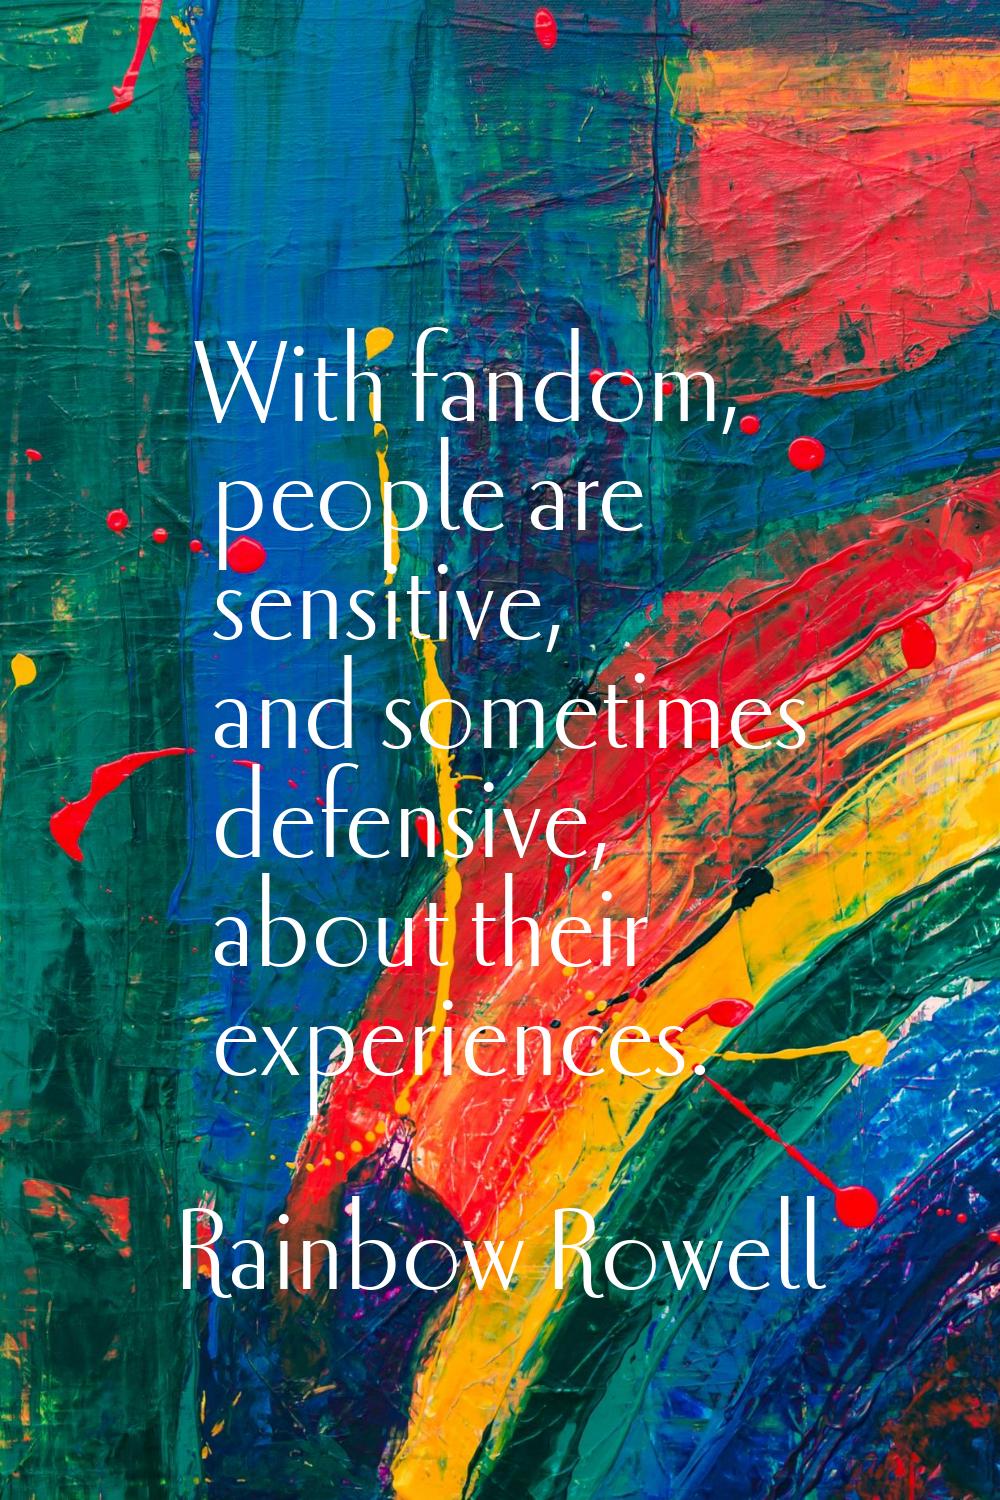 With fandom, people are sensitive, and sometimes defensive, about their experiences.